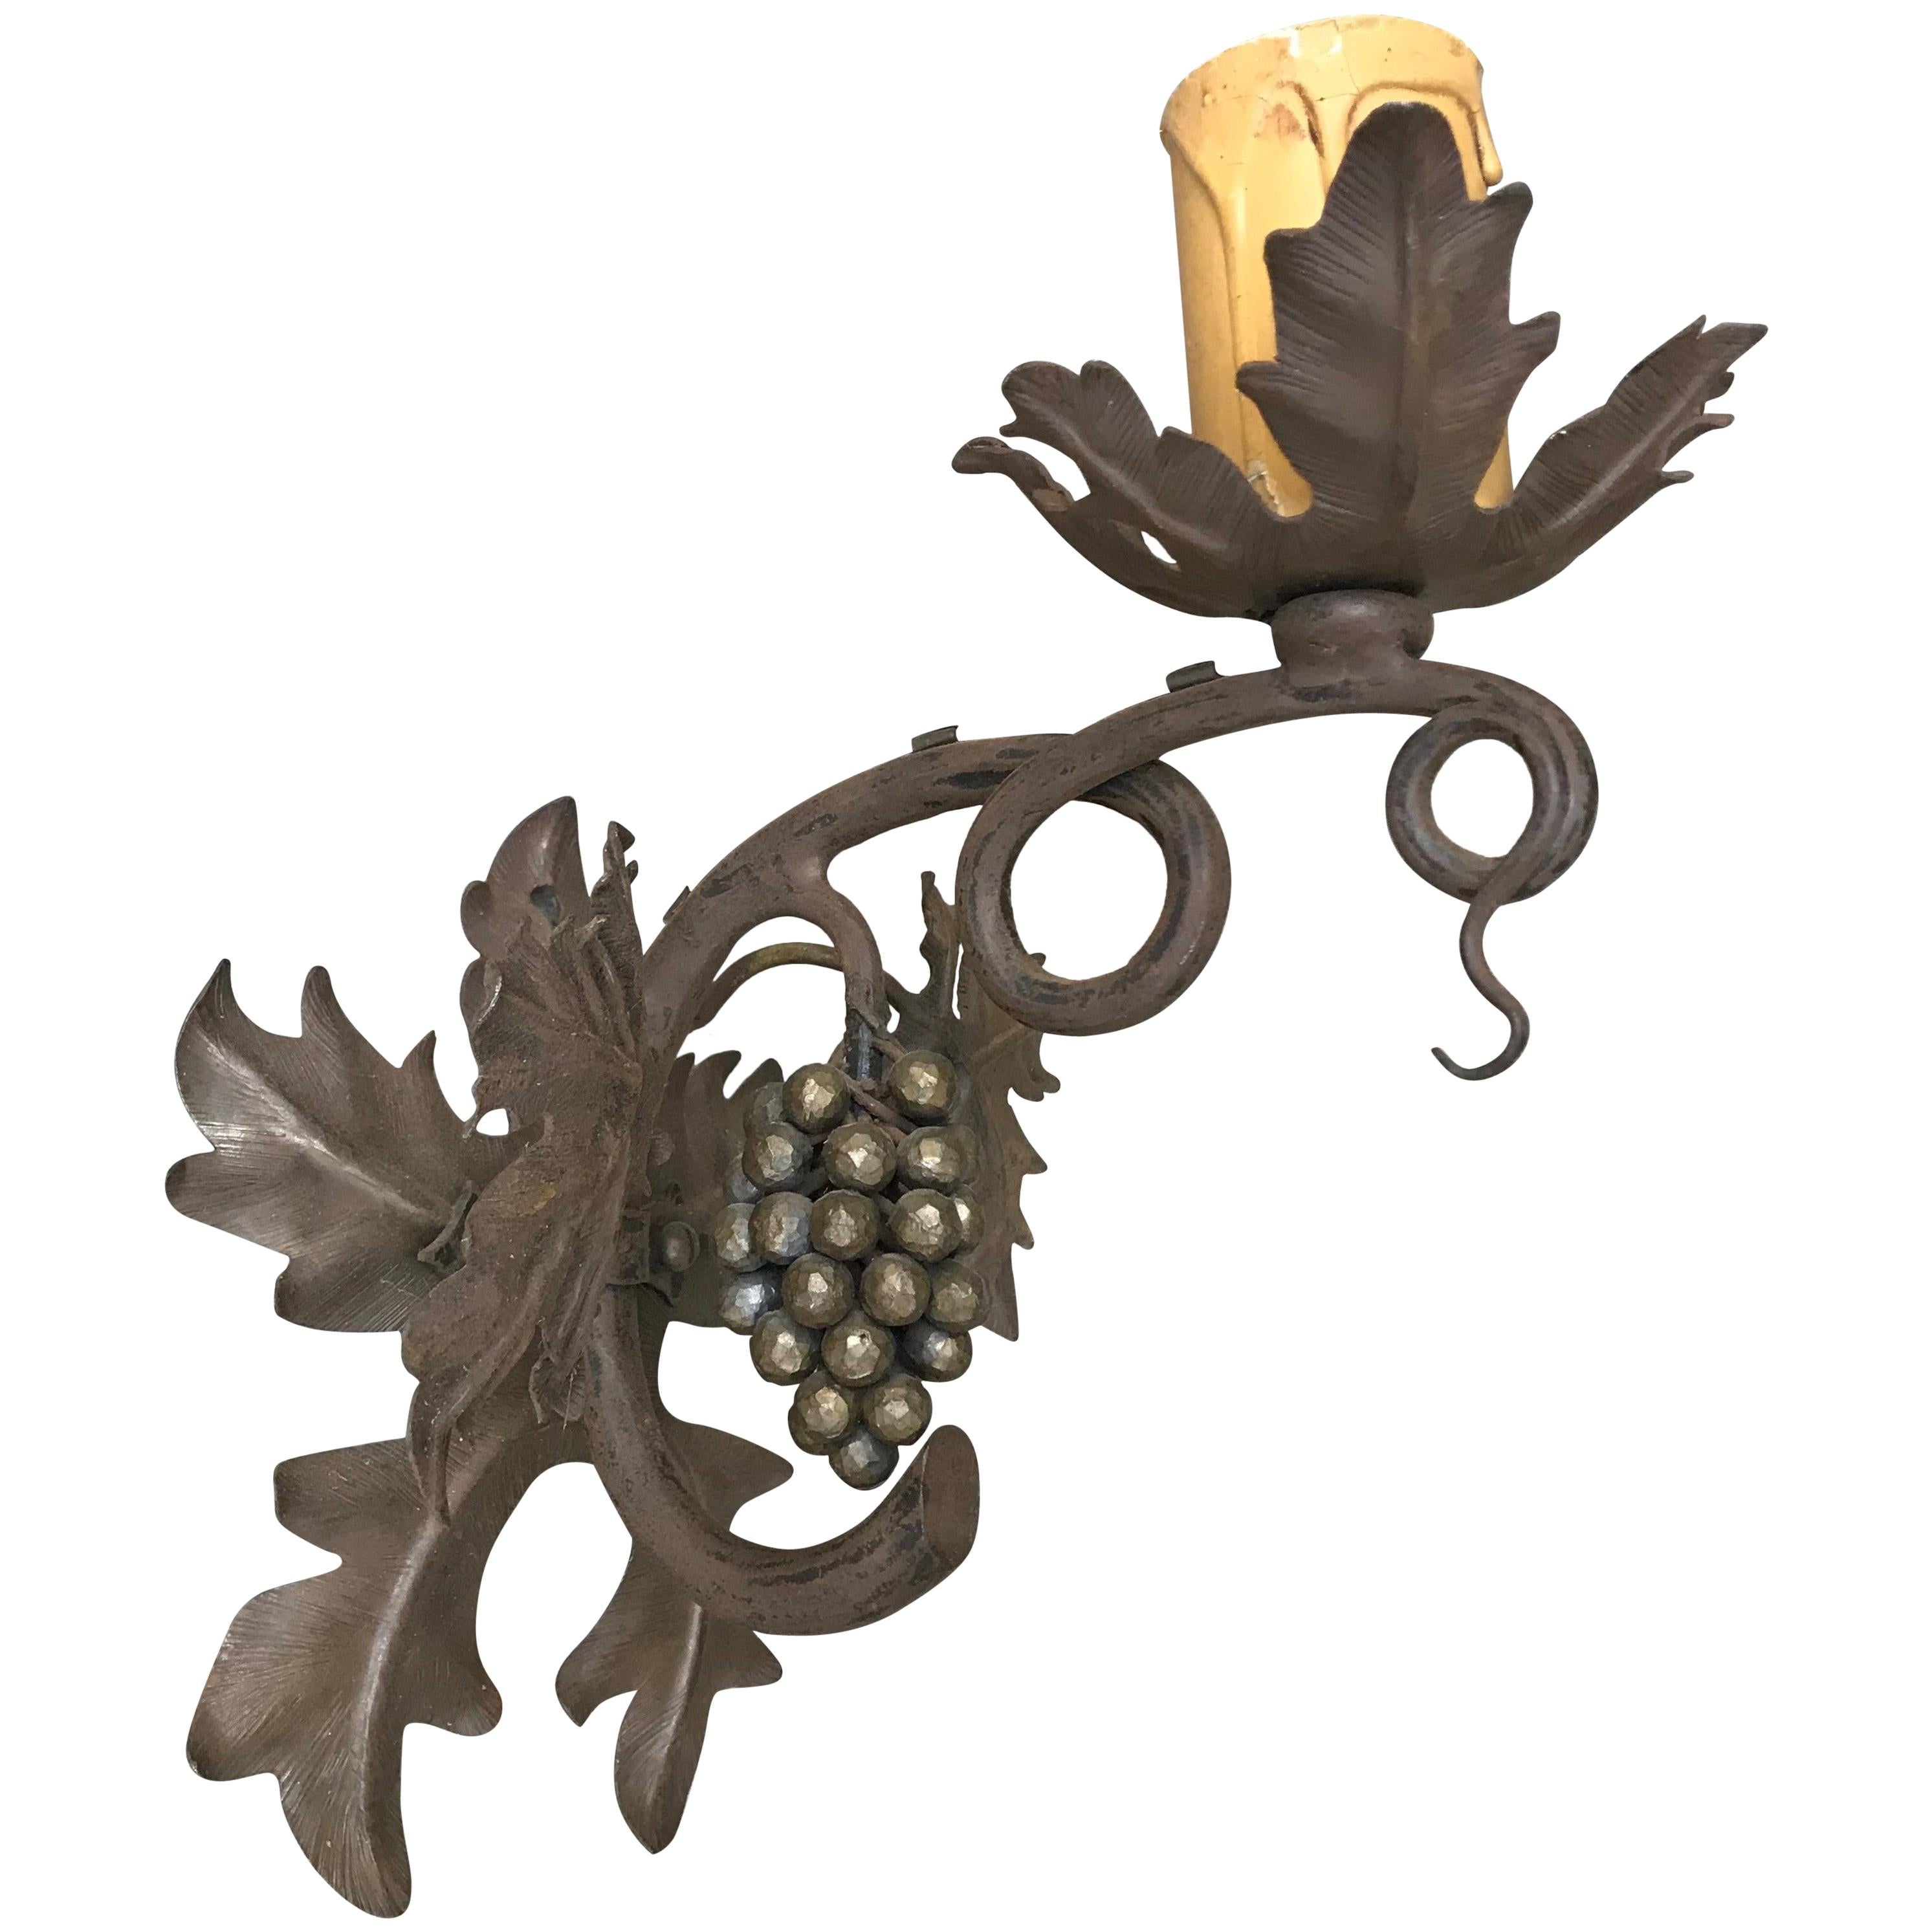 Antique Wine Theme Wall Lamp/Sconce with Wrought Iron Bunch of Grapes & Leafs